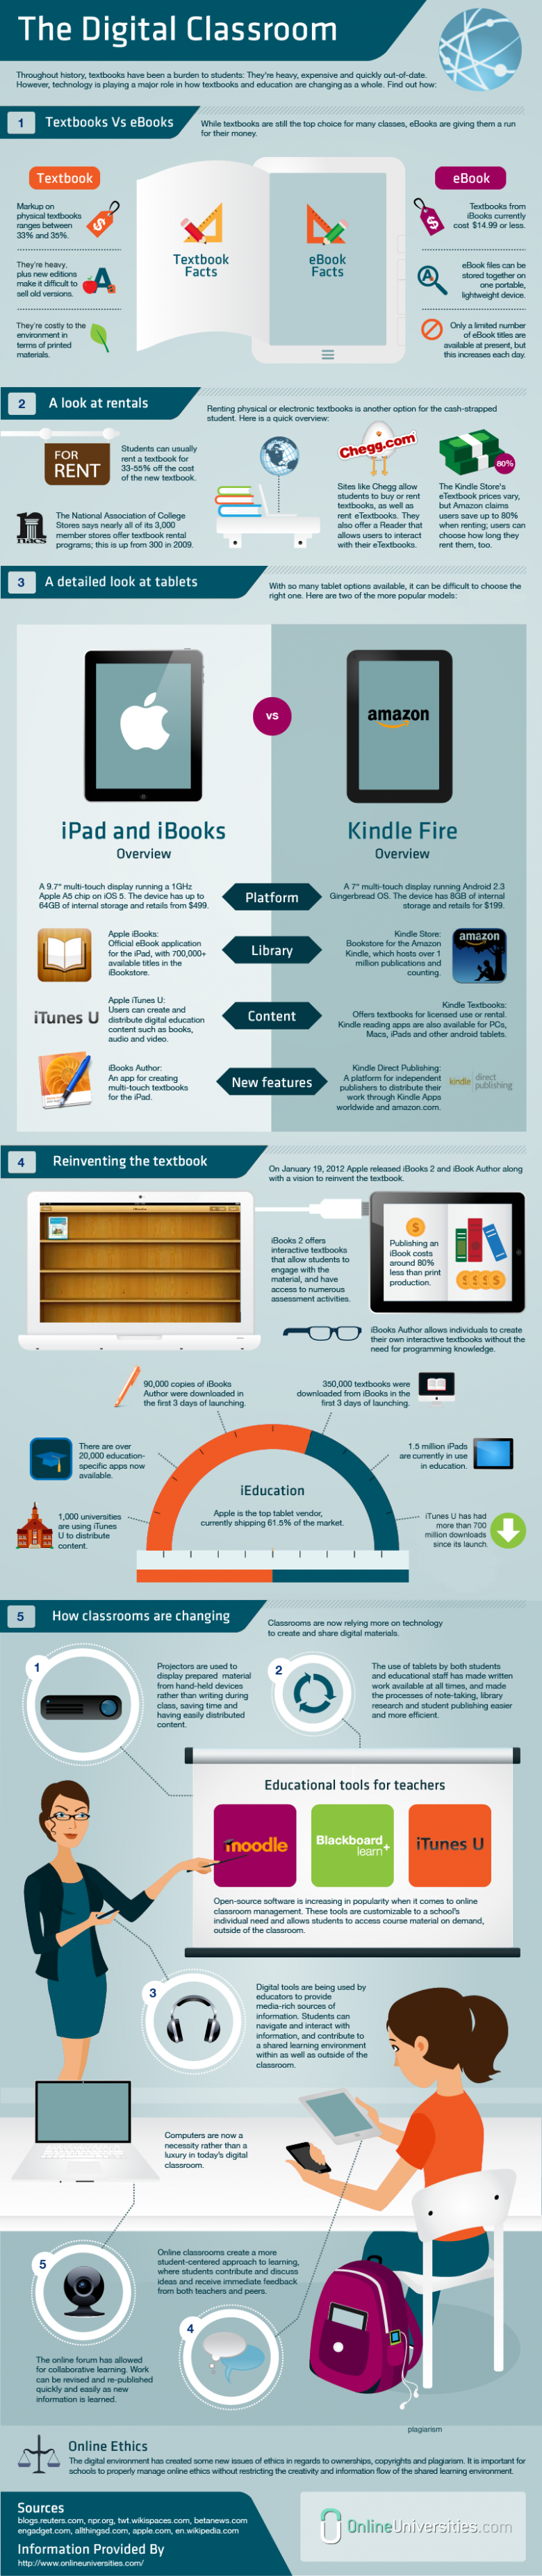 Infographic of the digital classroom 